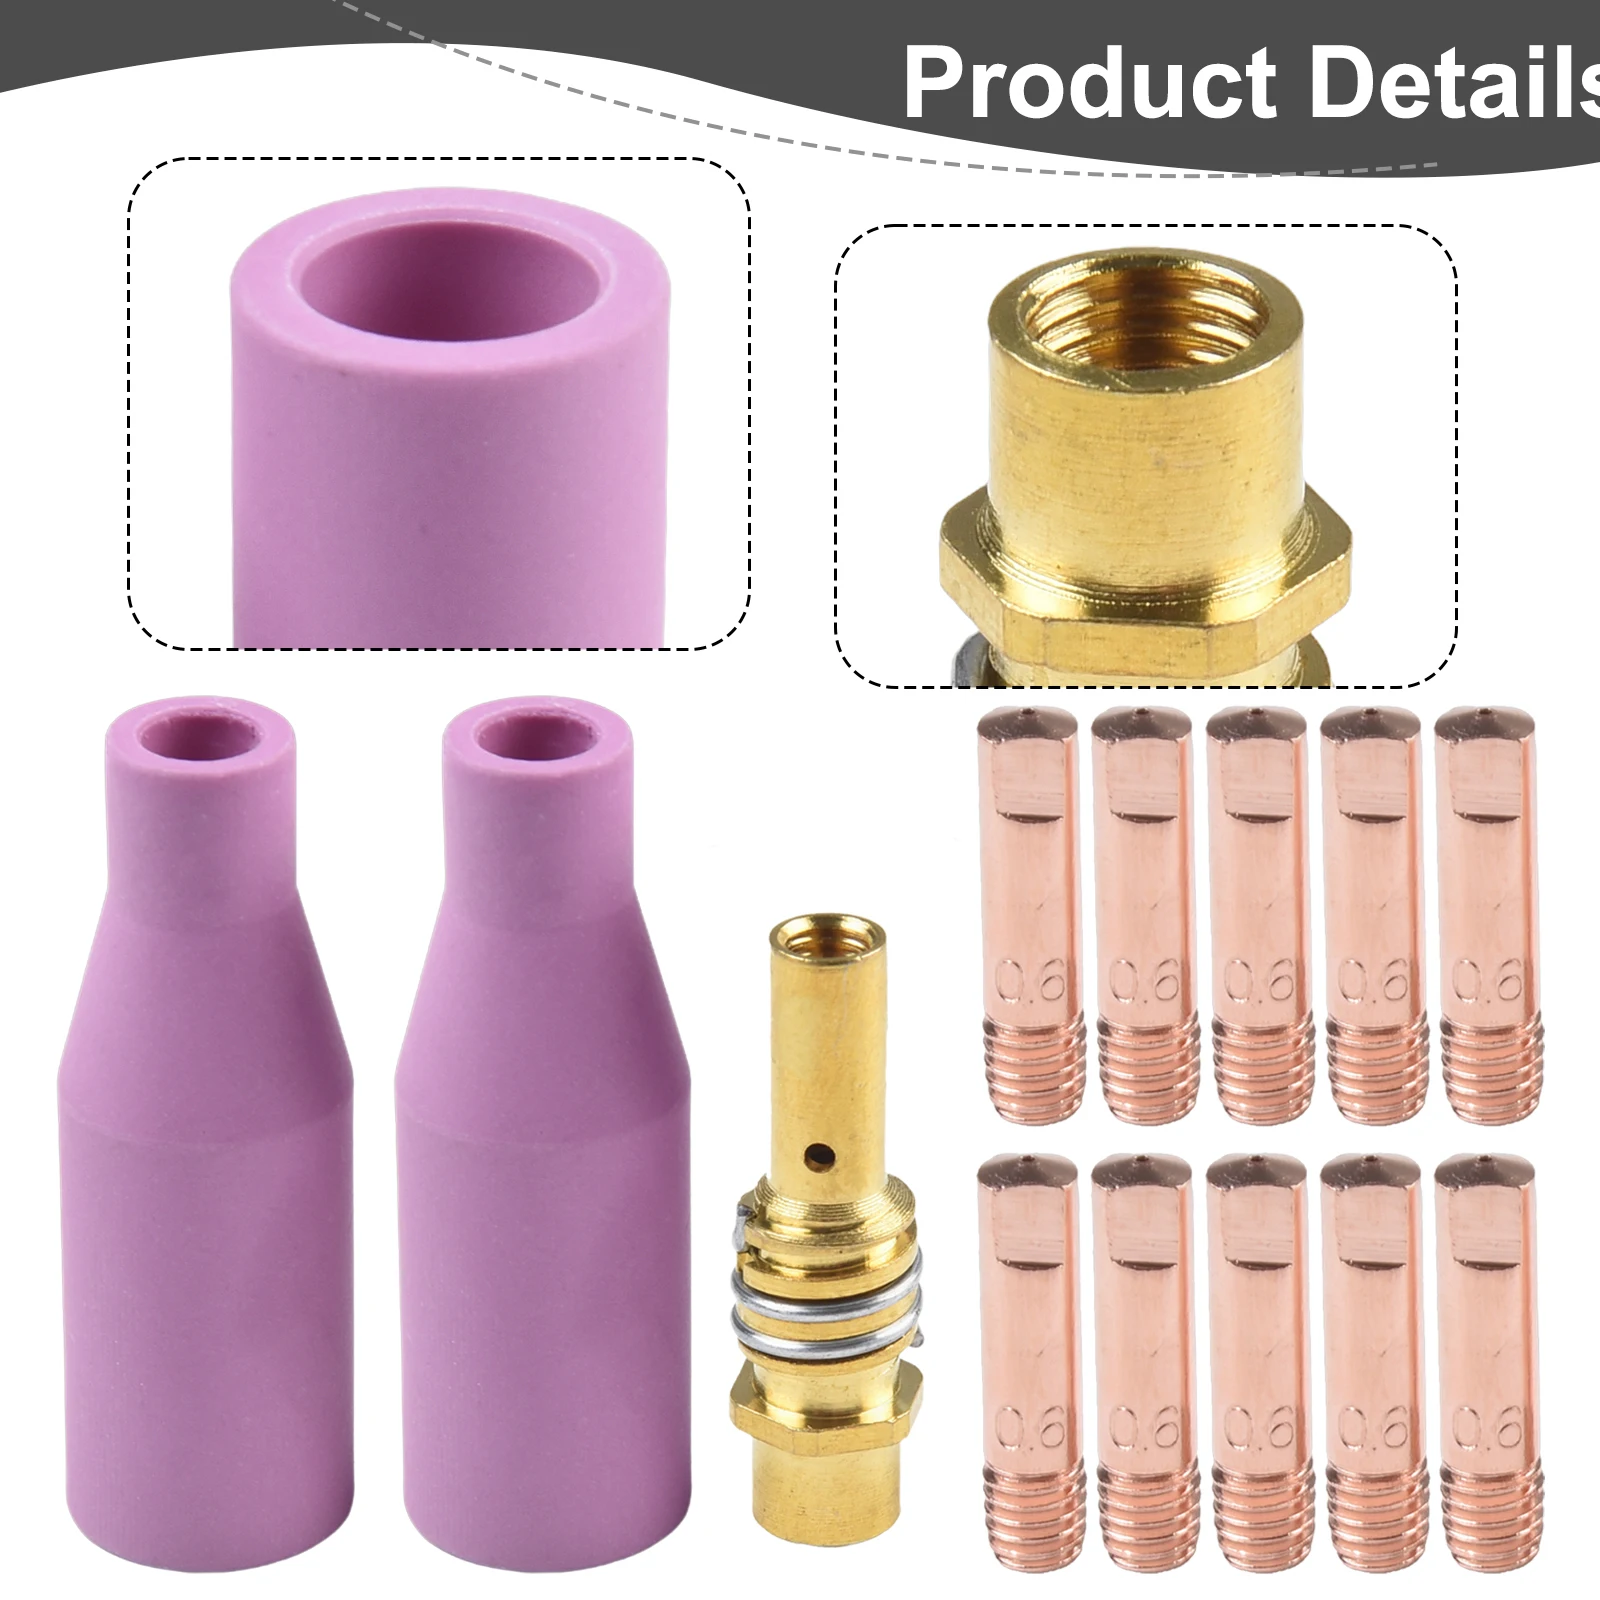 

For 15AK MIG Torch Welding Nozzle Argon Gas Ceramic Nozzle Holder Contact Tip 0.6mm 0.8mm 0.9mm 1.0mm 1.2mm Welding Torch